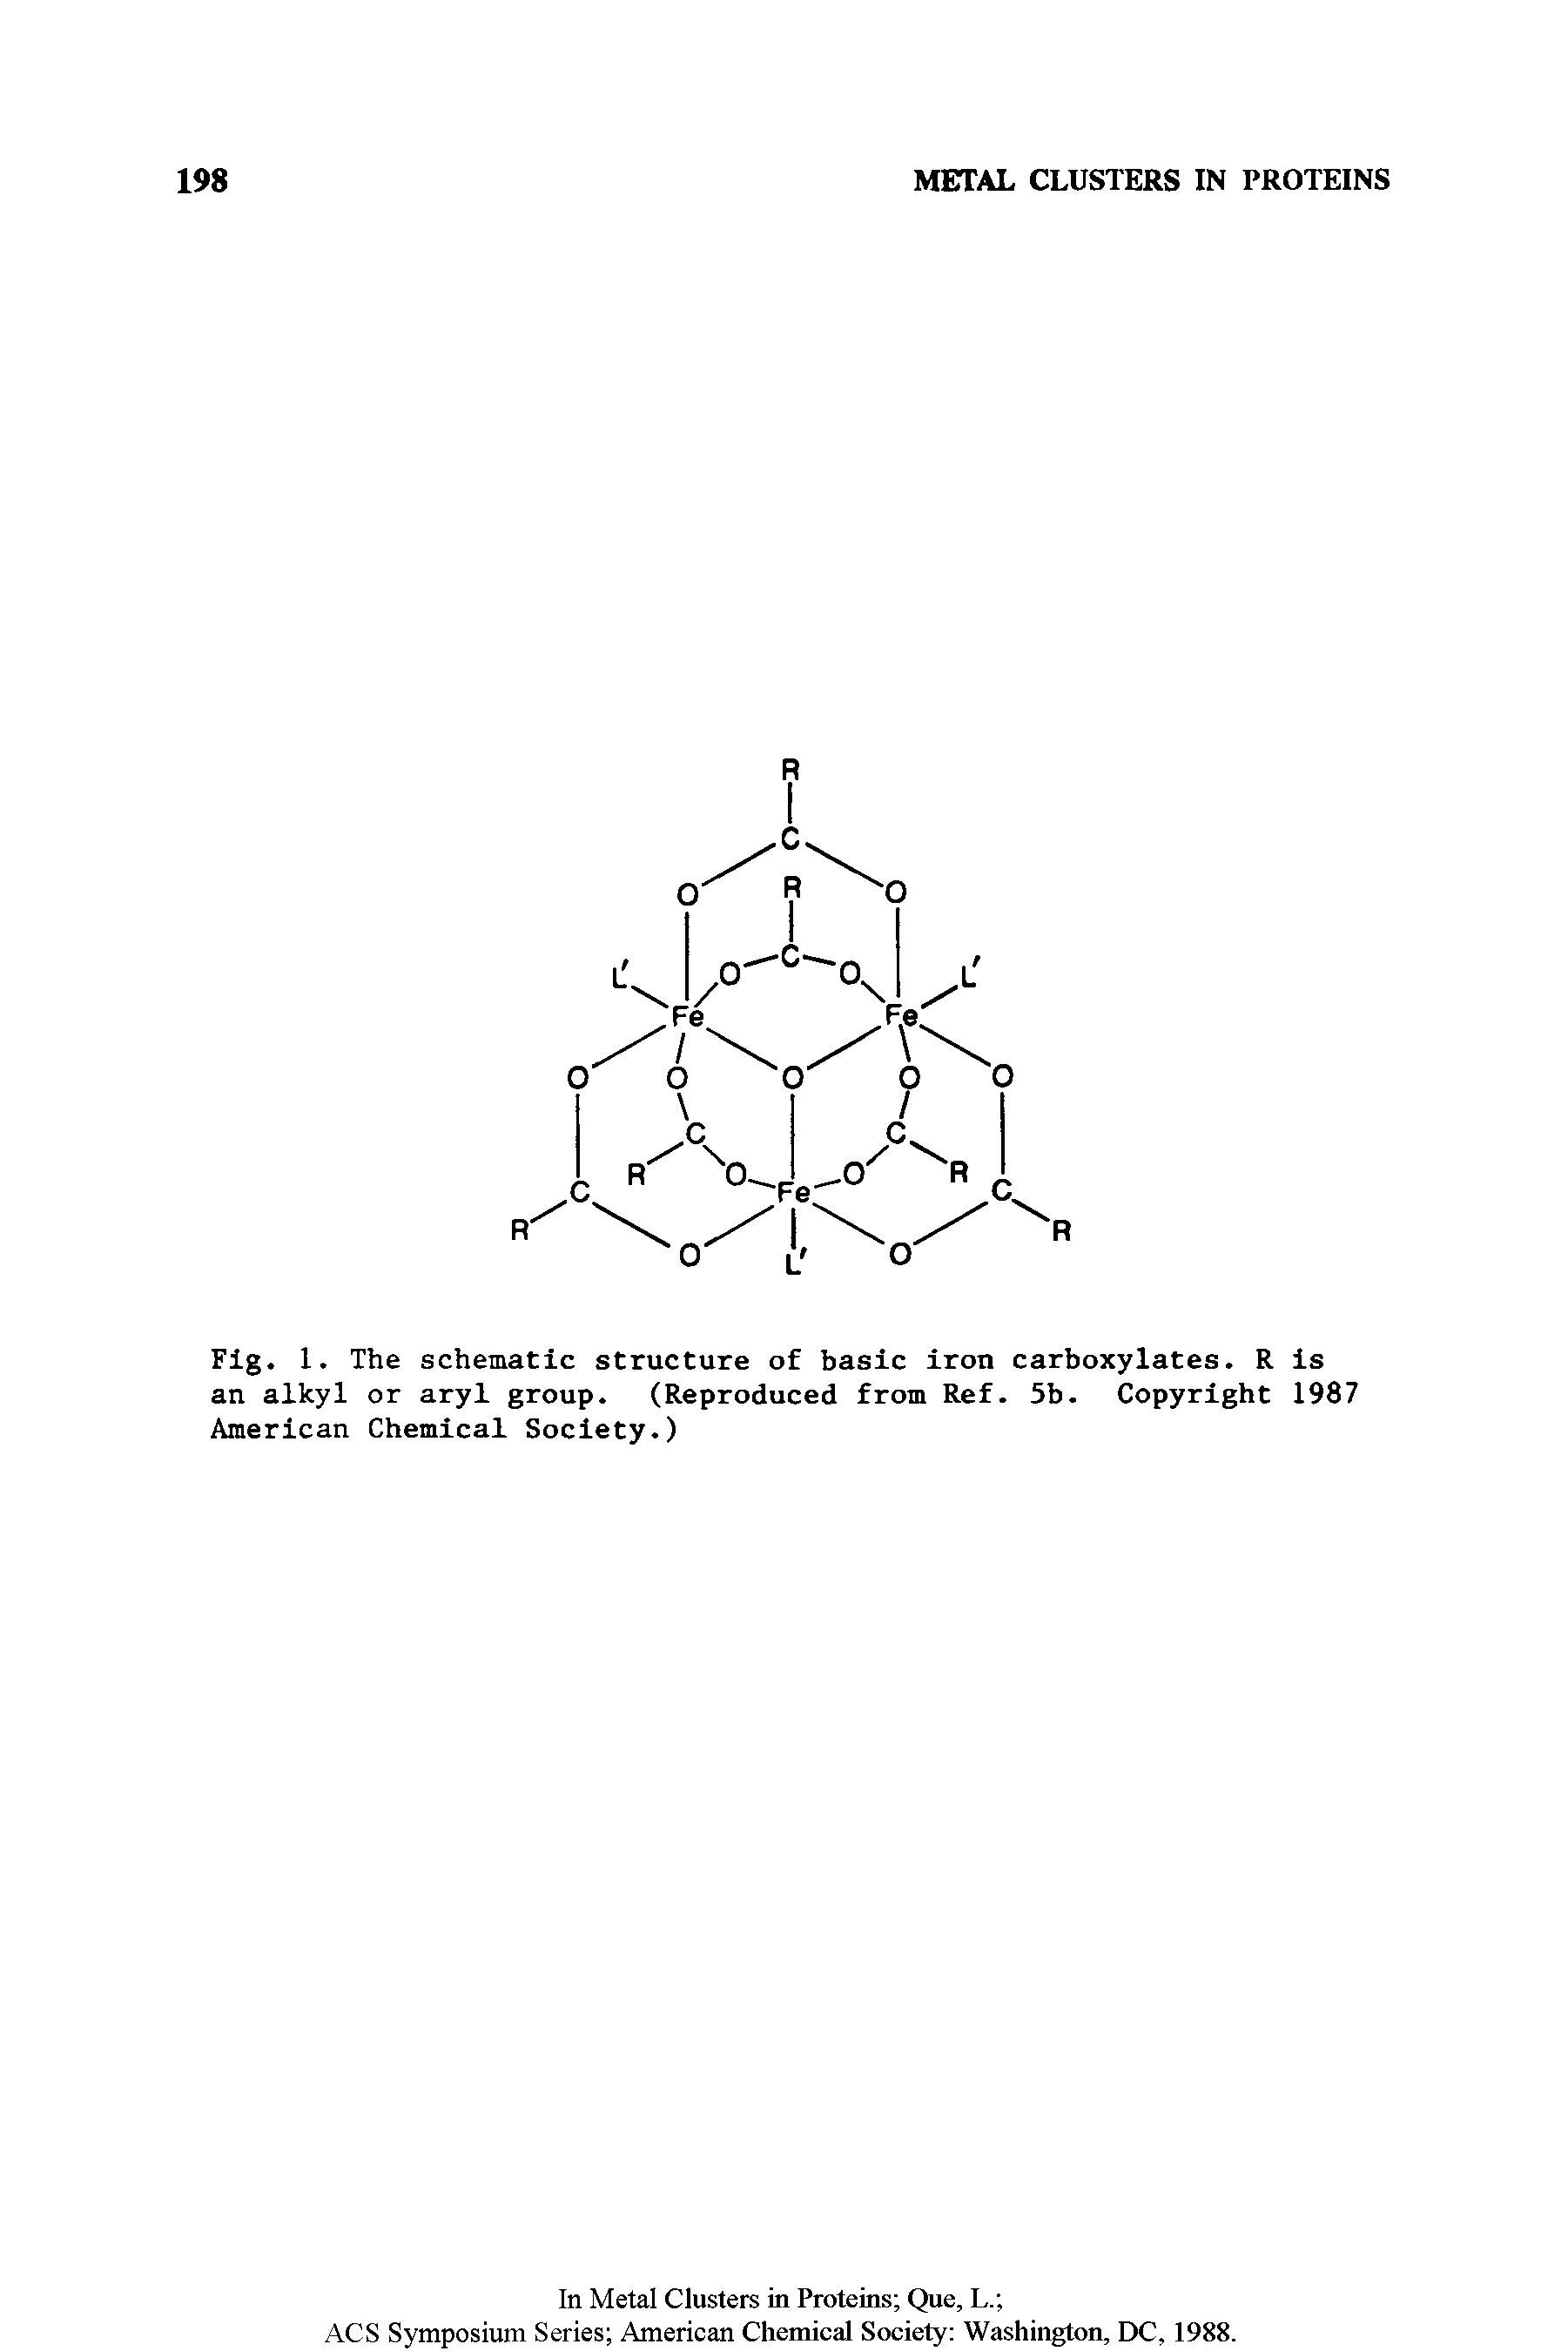 Fig. 1. The schematic structure of basic iron carboxylates. R is an alkyl or aryl group. (Reproduced from Ref. 5b. Copyright 1987 American Chemical Society.)...